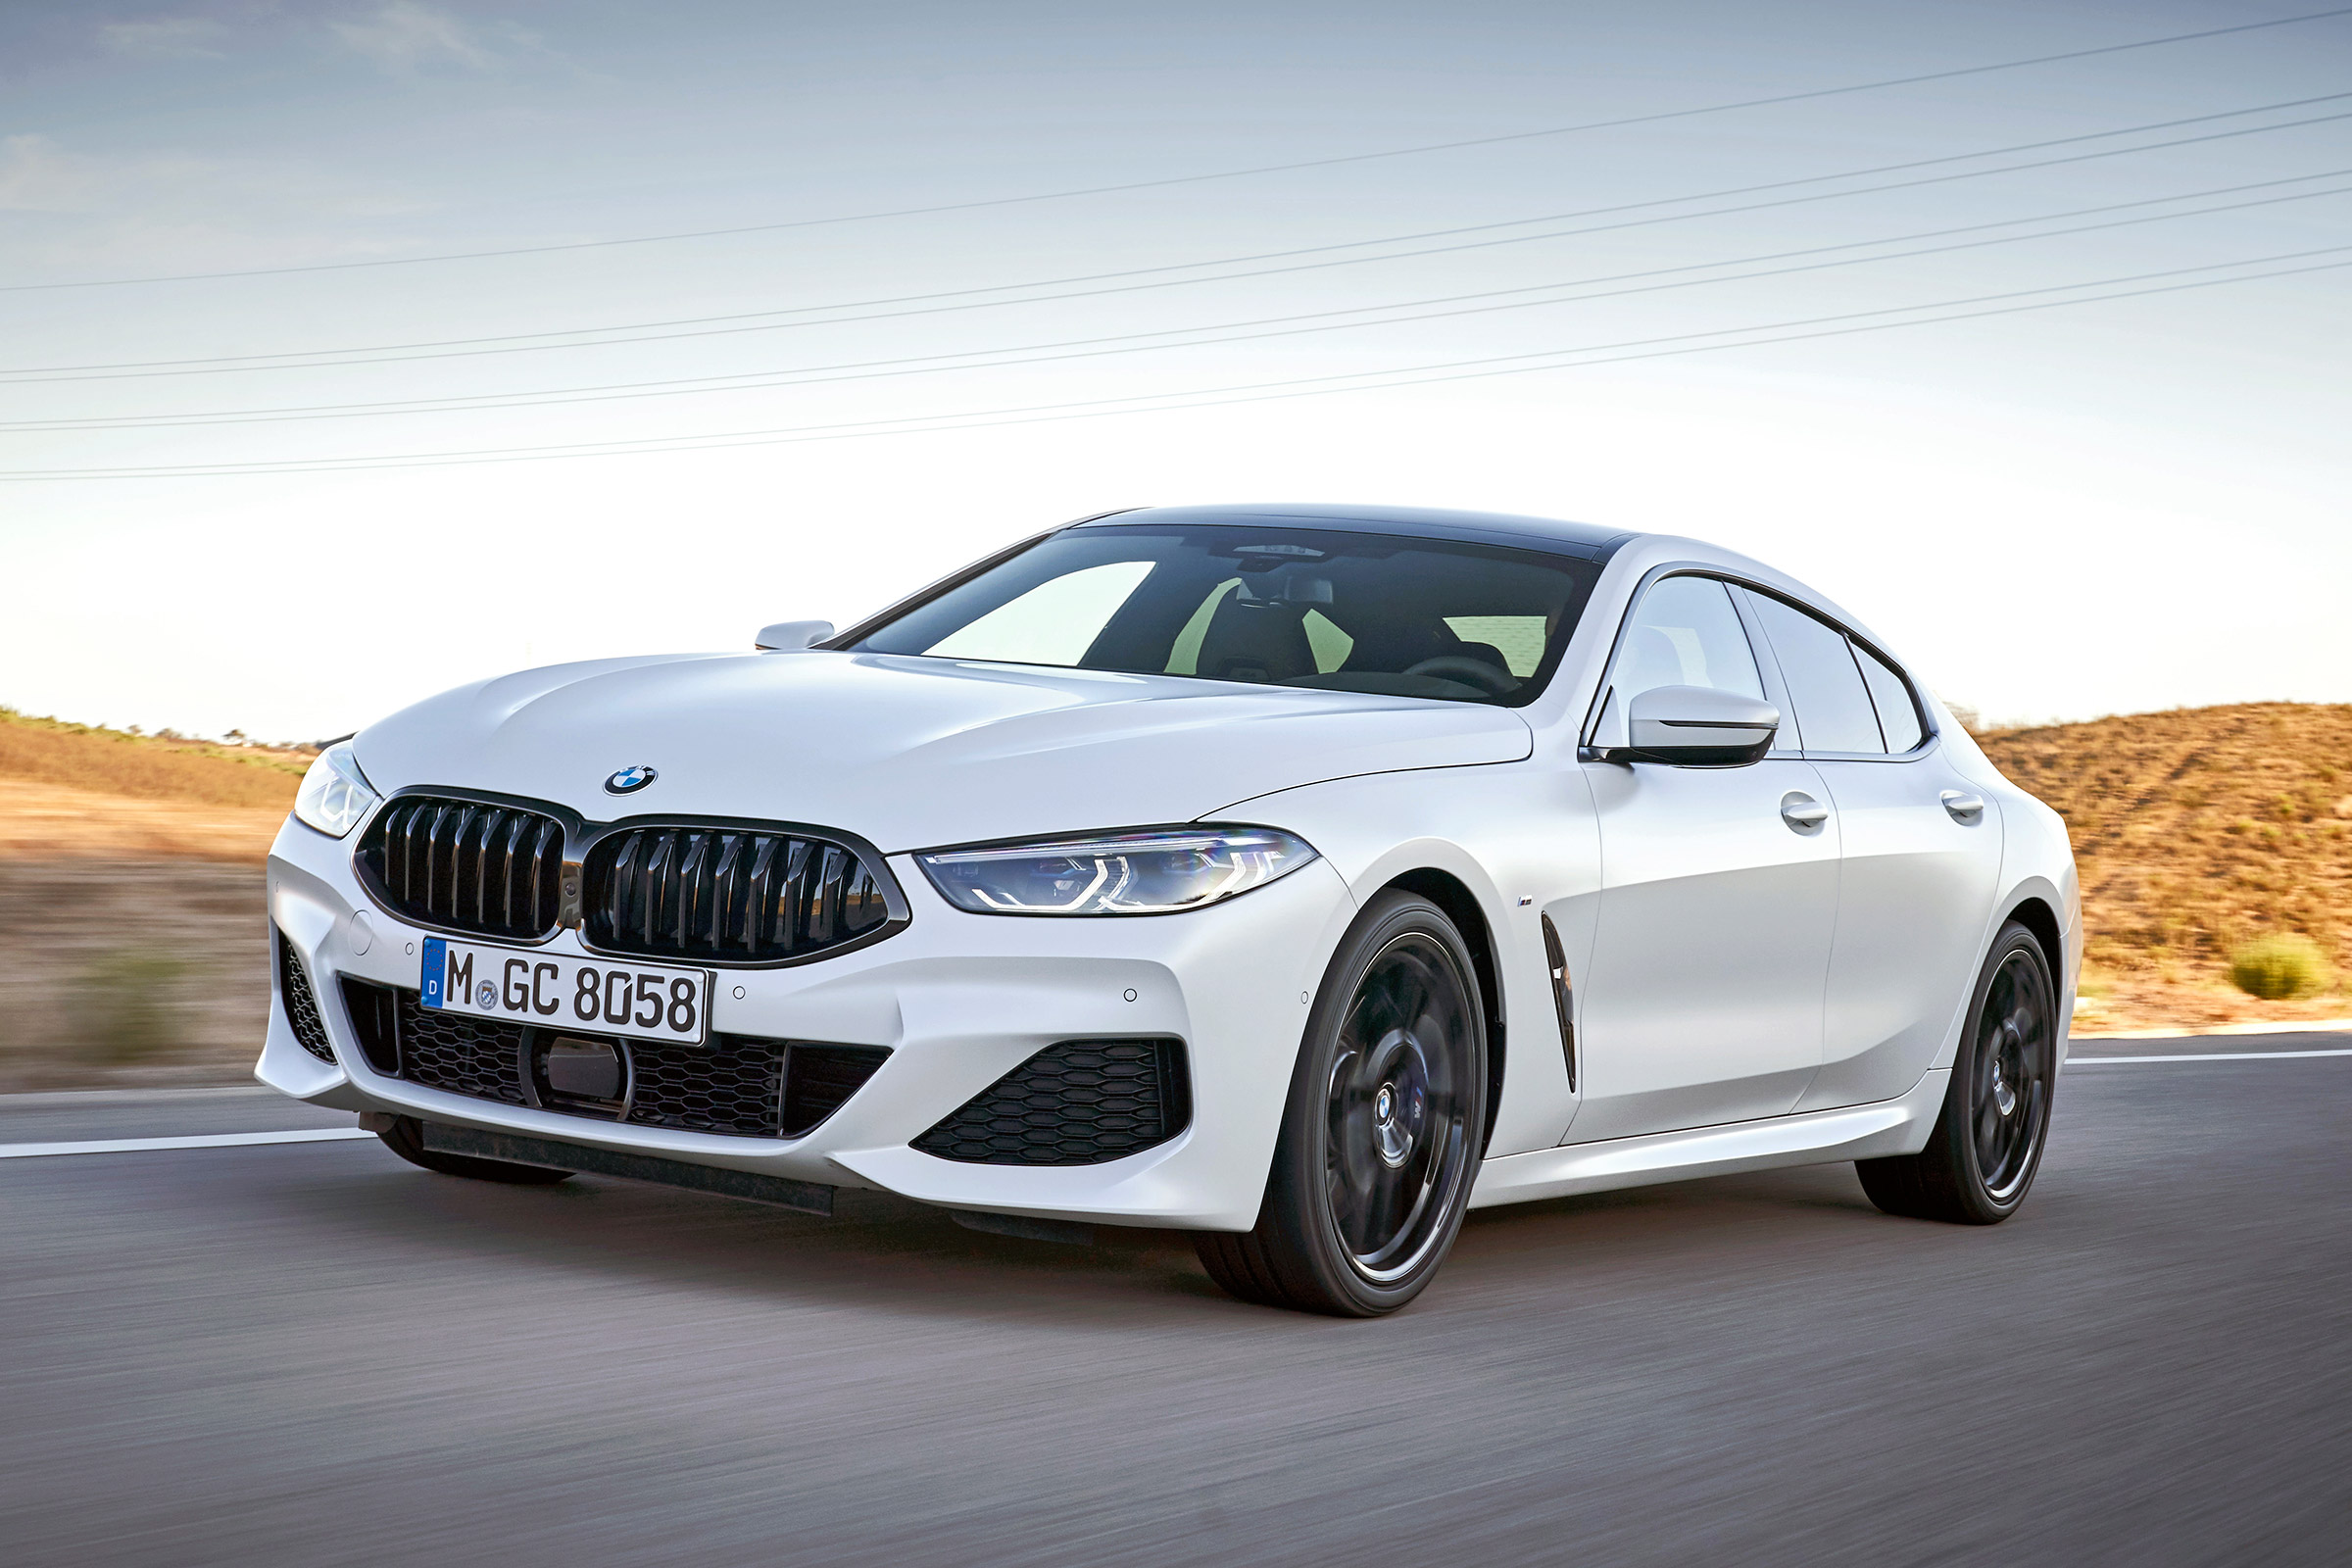 Experience Luxury In The 2019 BMW 8 Series Coupe